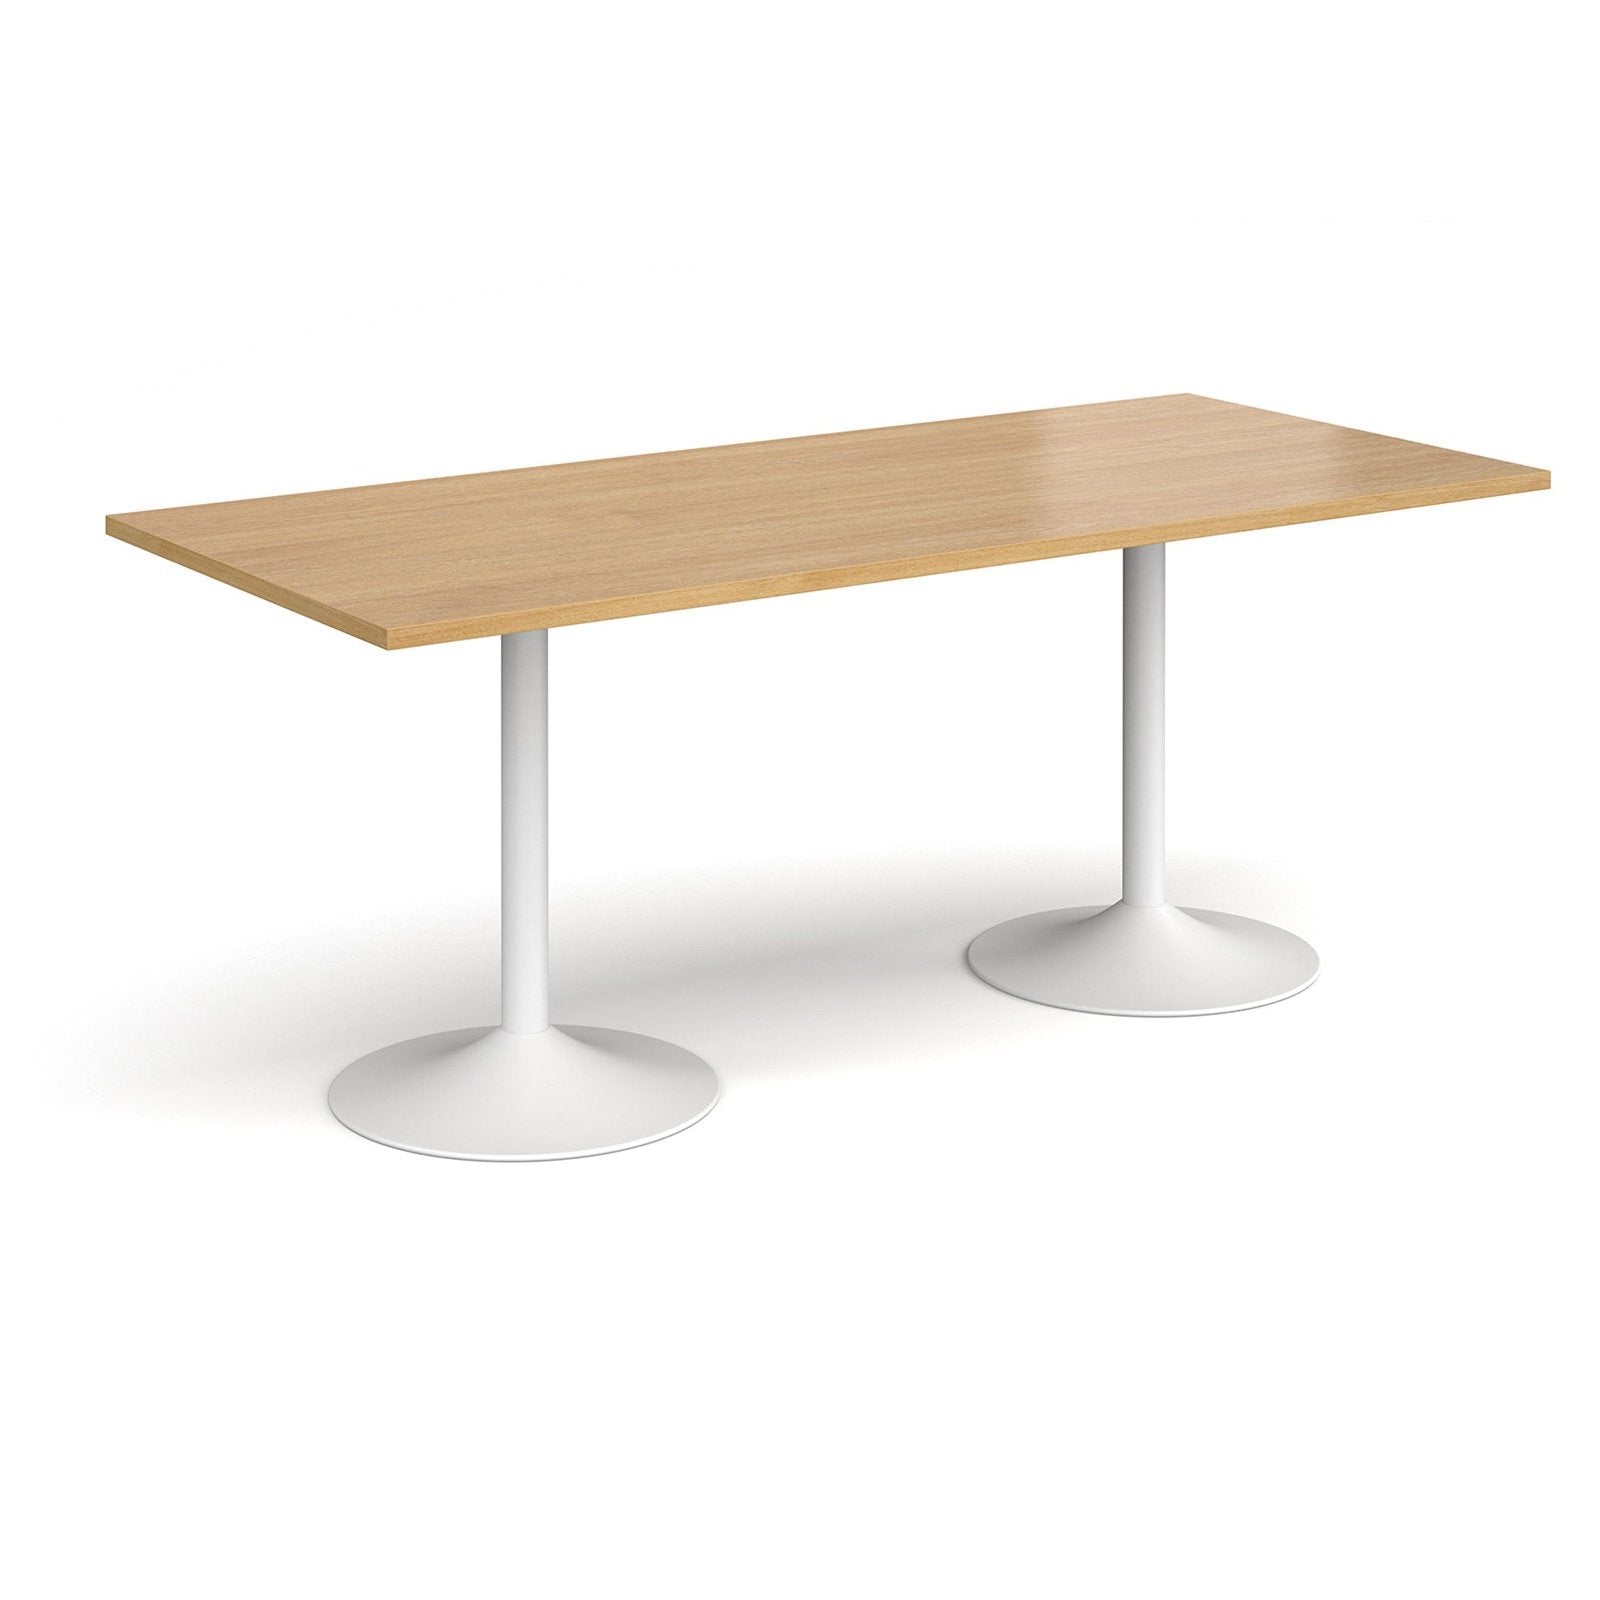 Genoa rectangular dining table with trumpet base - Office Products Online